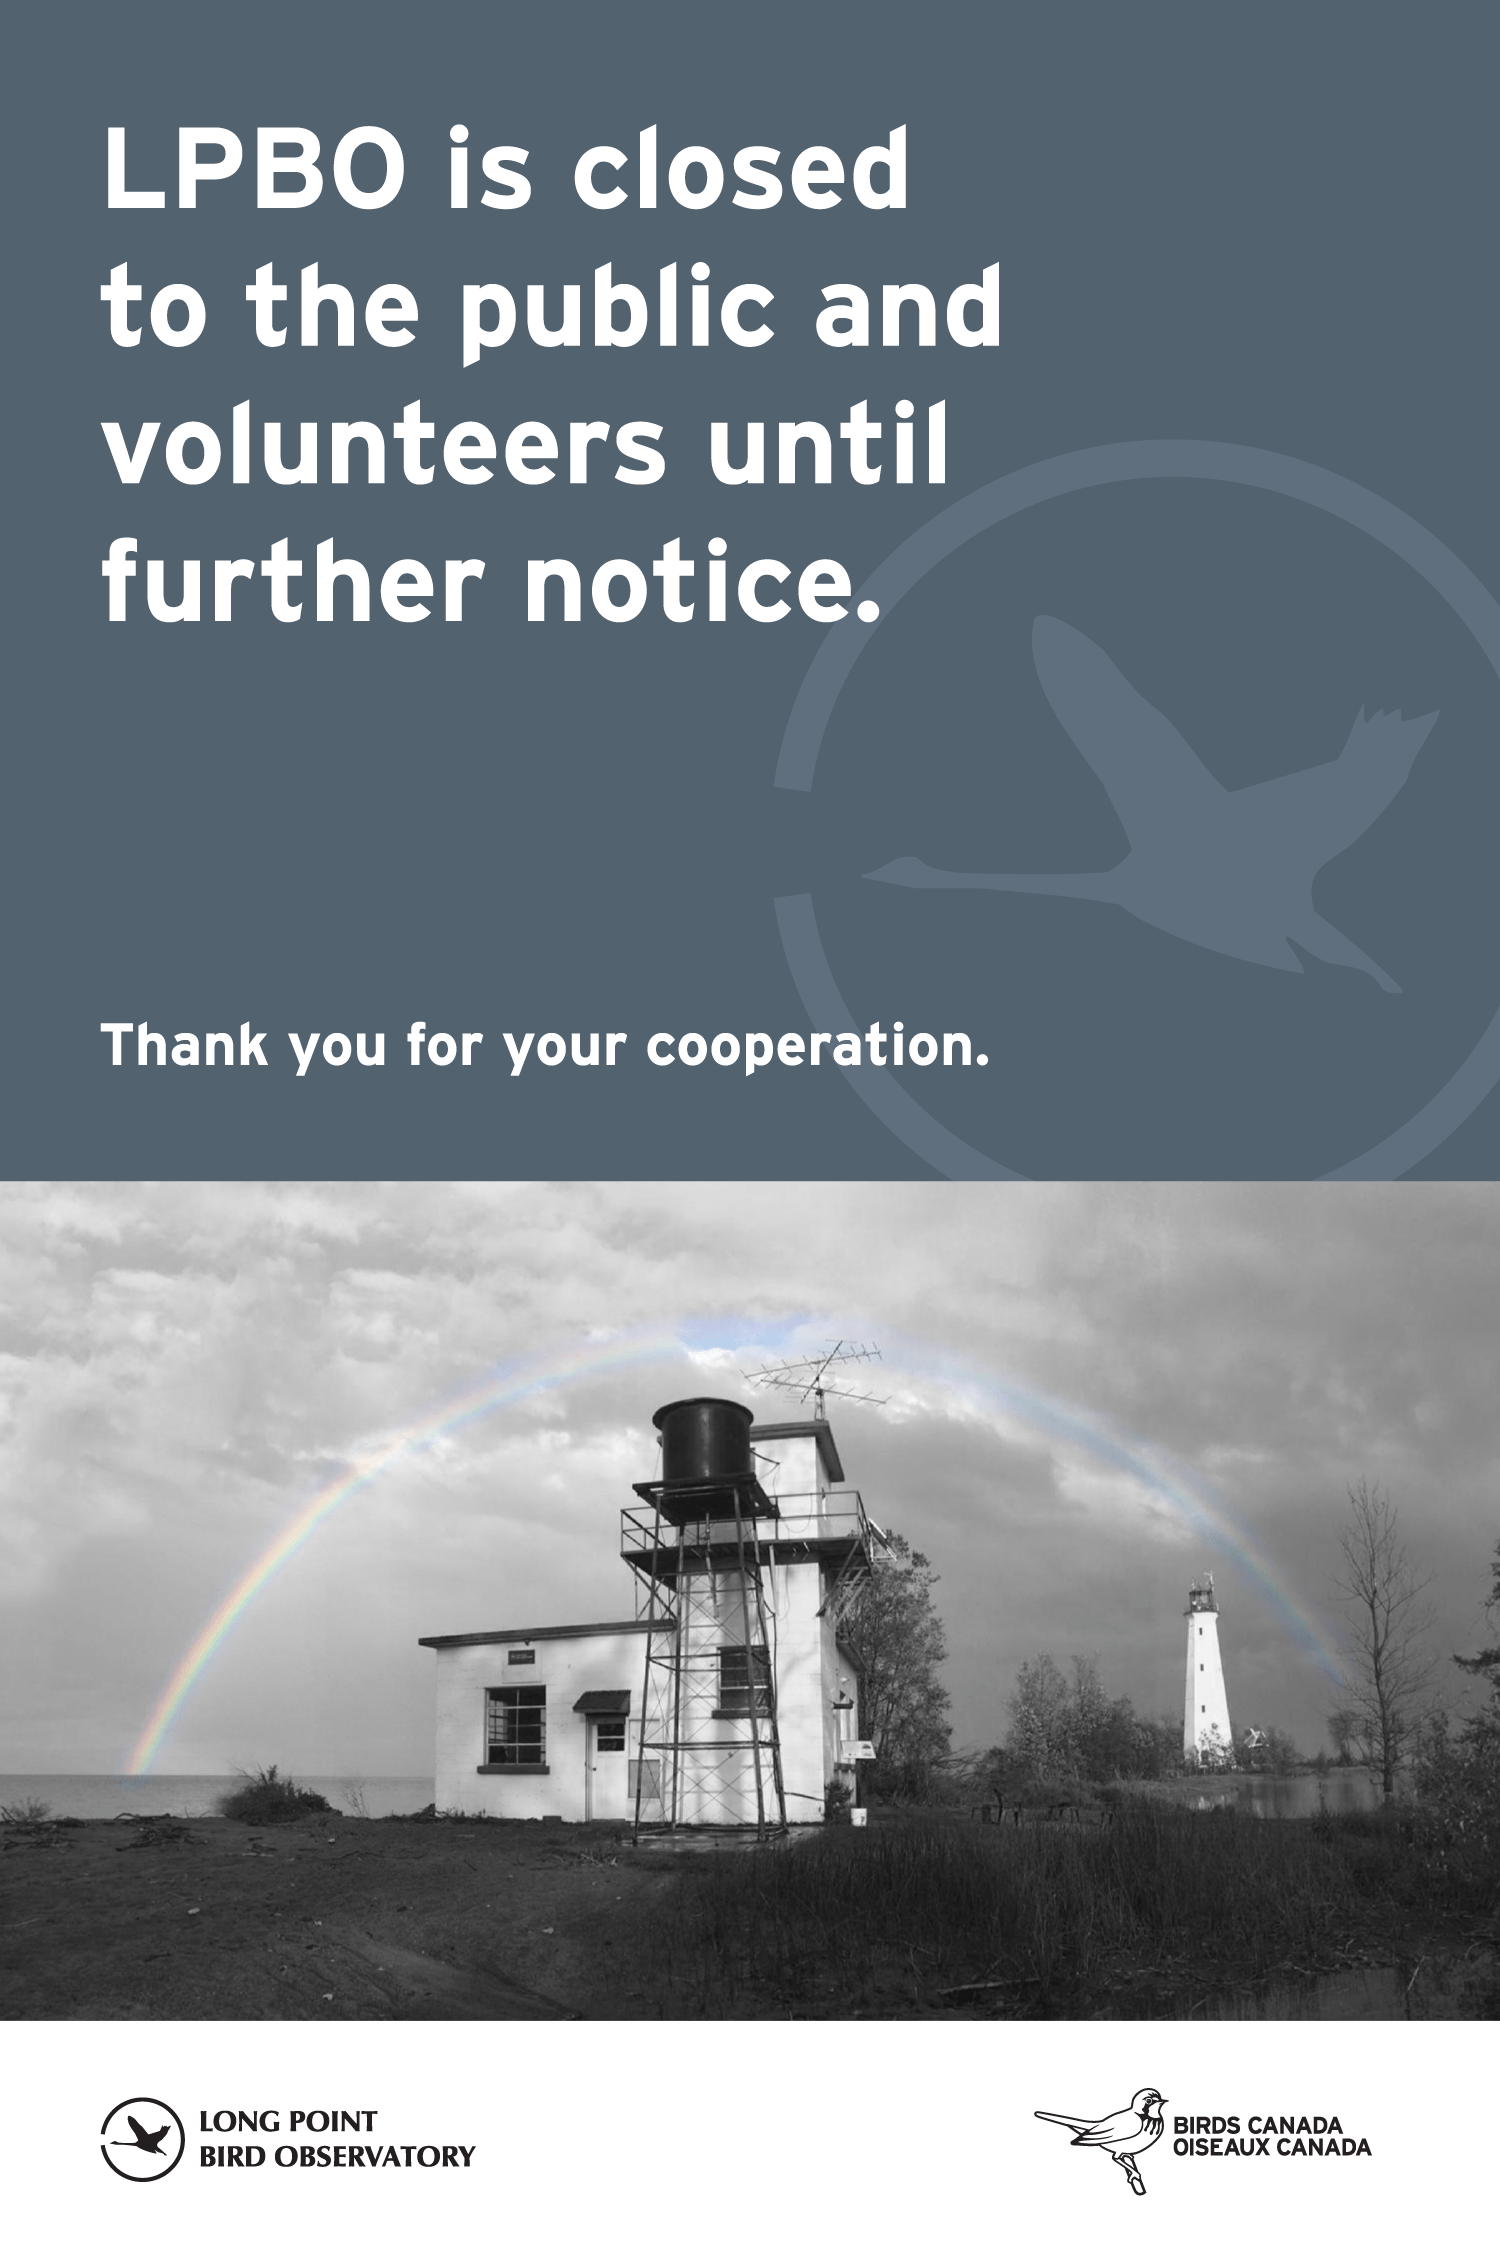 Long Point Bird Observatory is closed to the public until further notice.